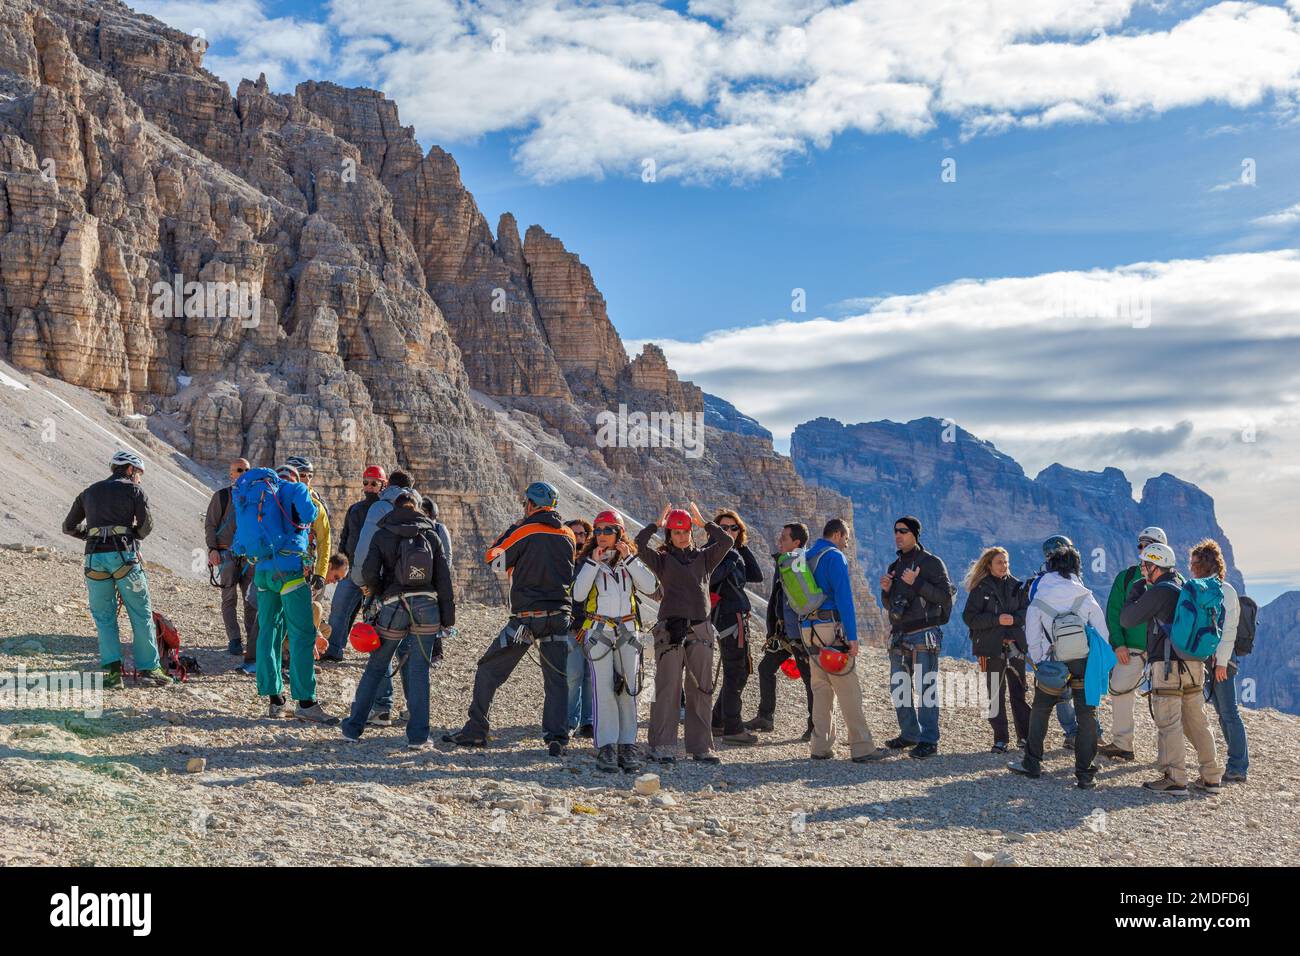 Group of hikers in the Dolomites mountains Stock Photo